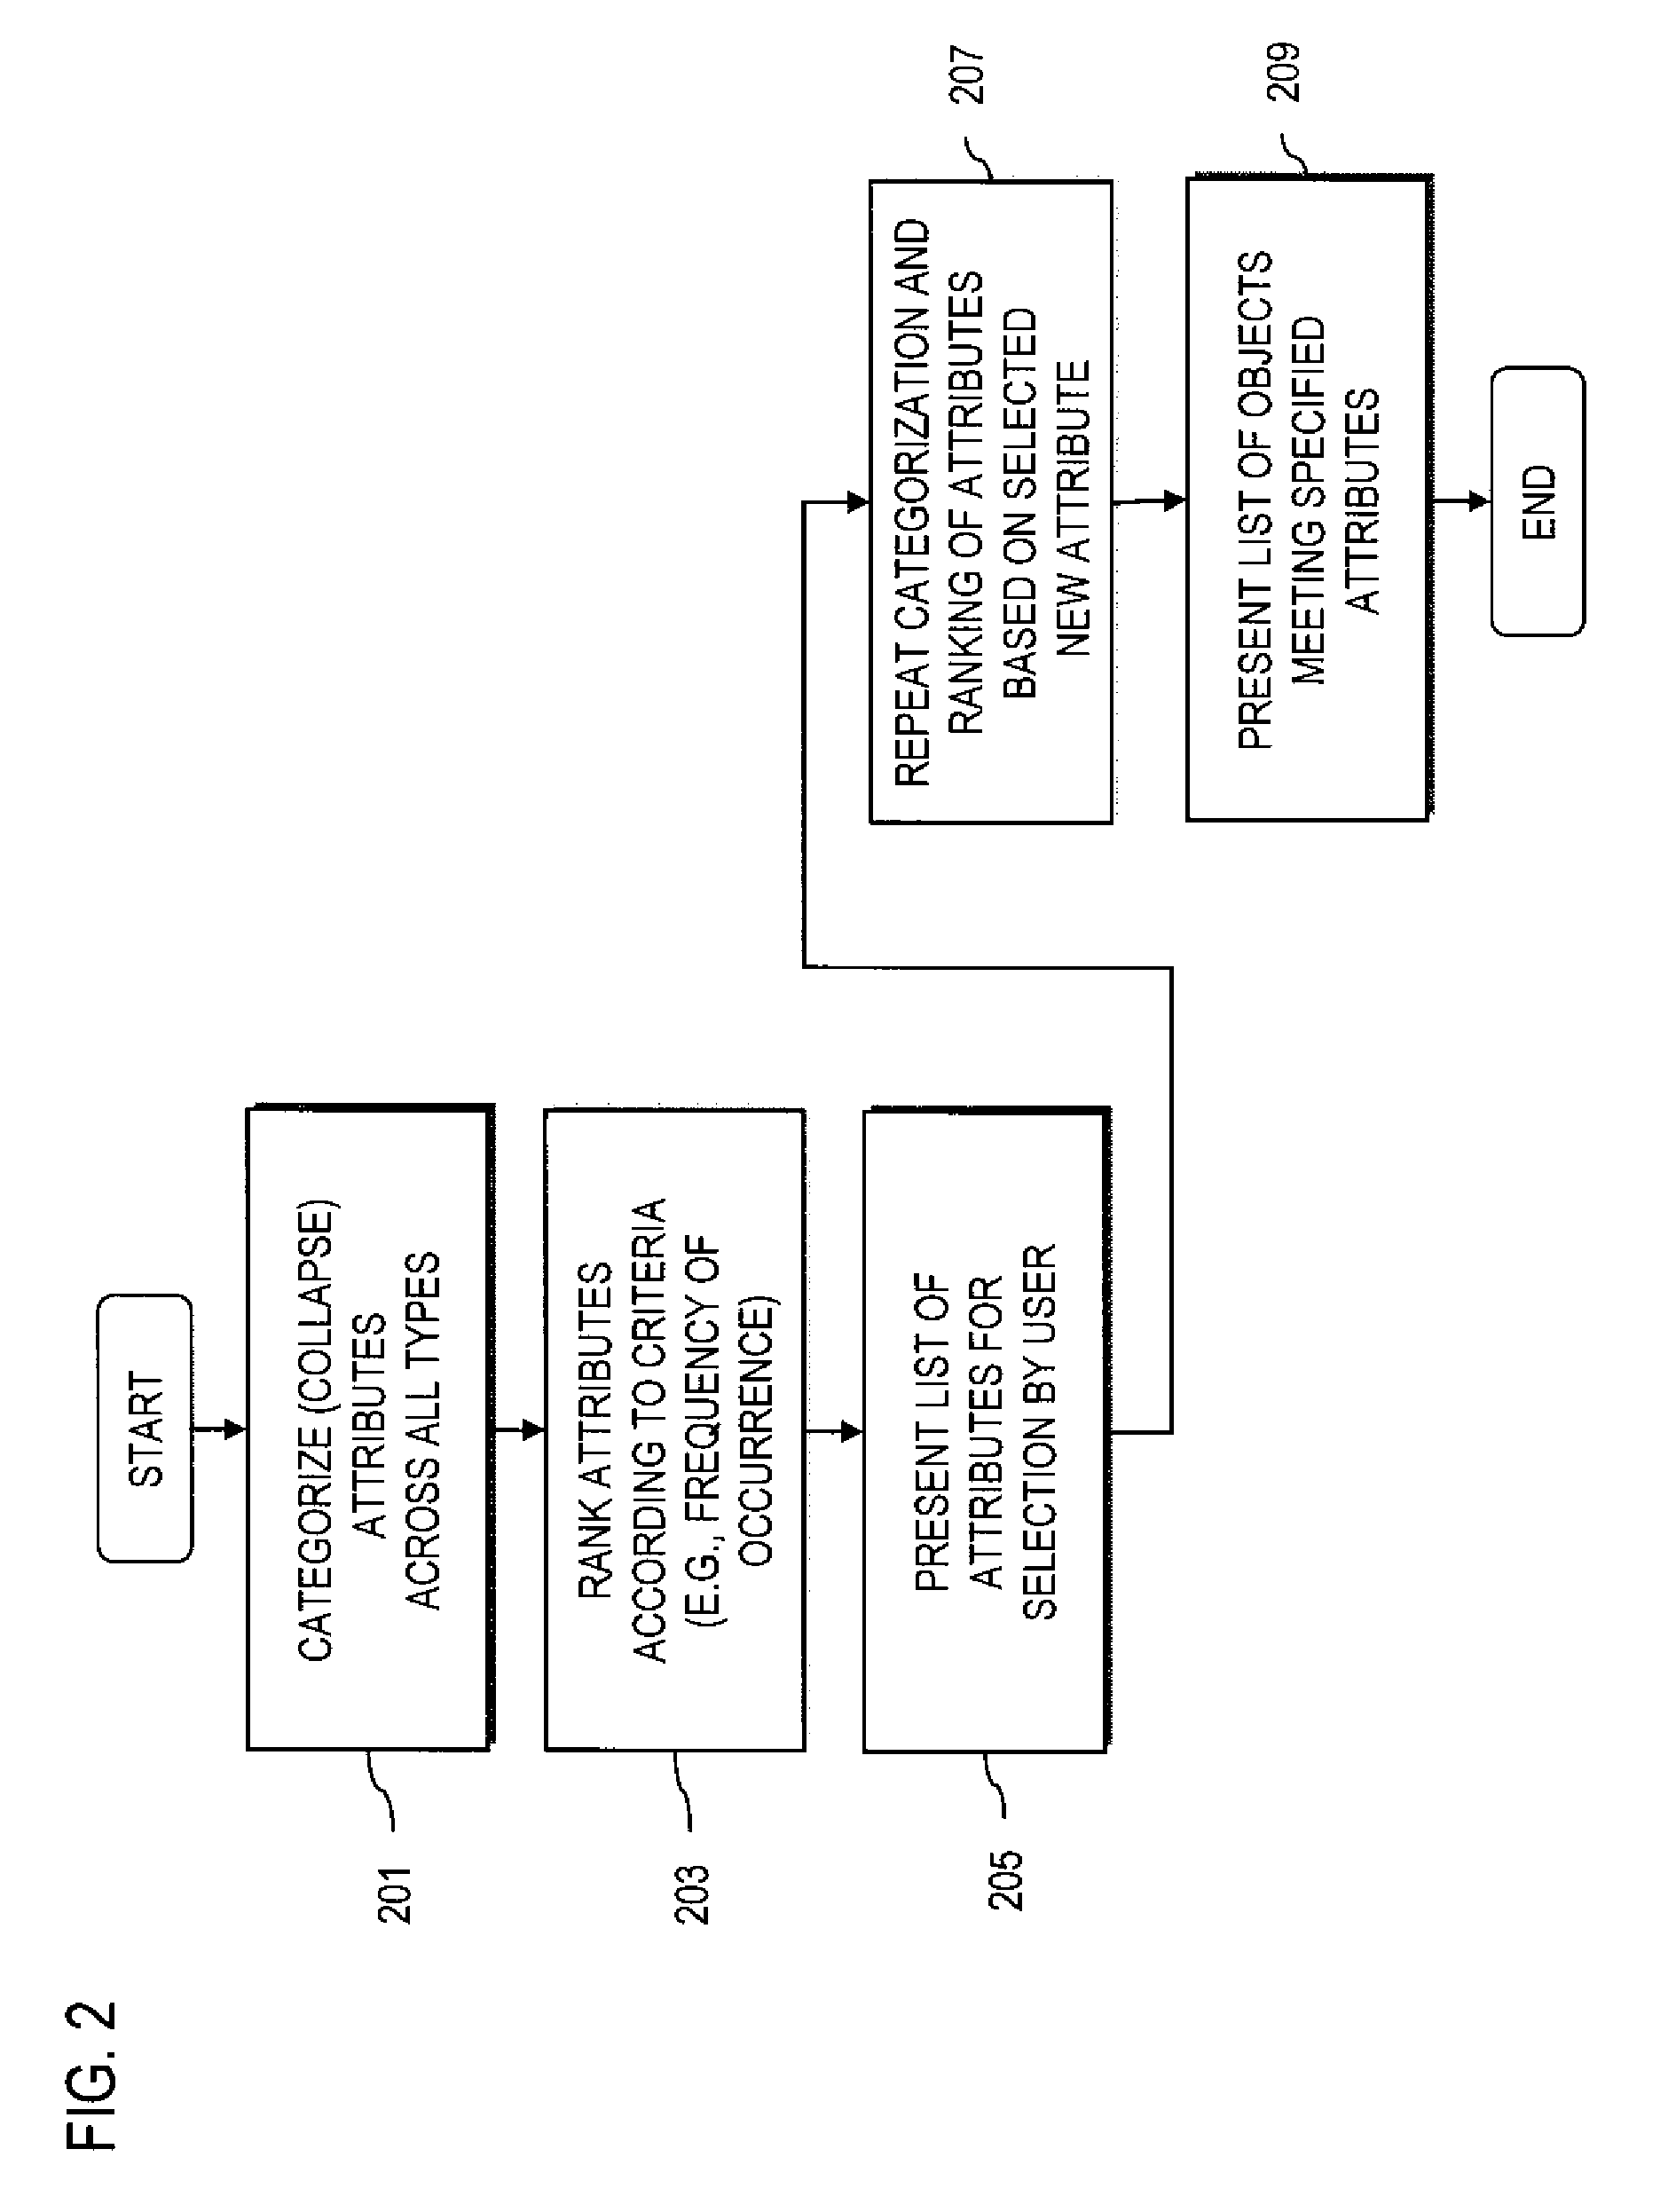 Method and system for providing attribute browsing of video assets